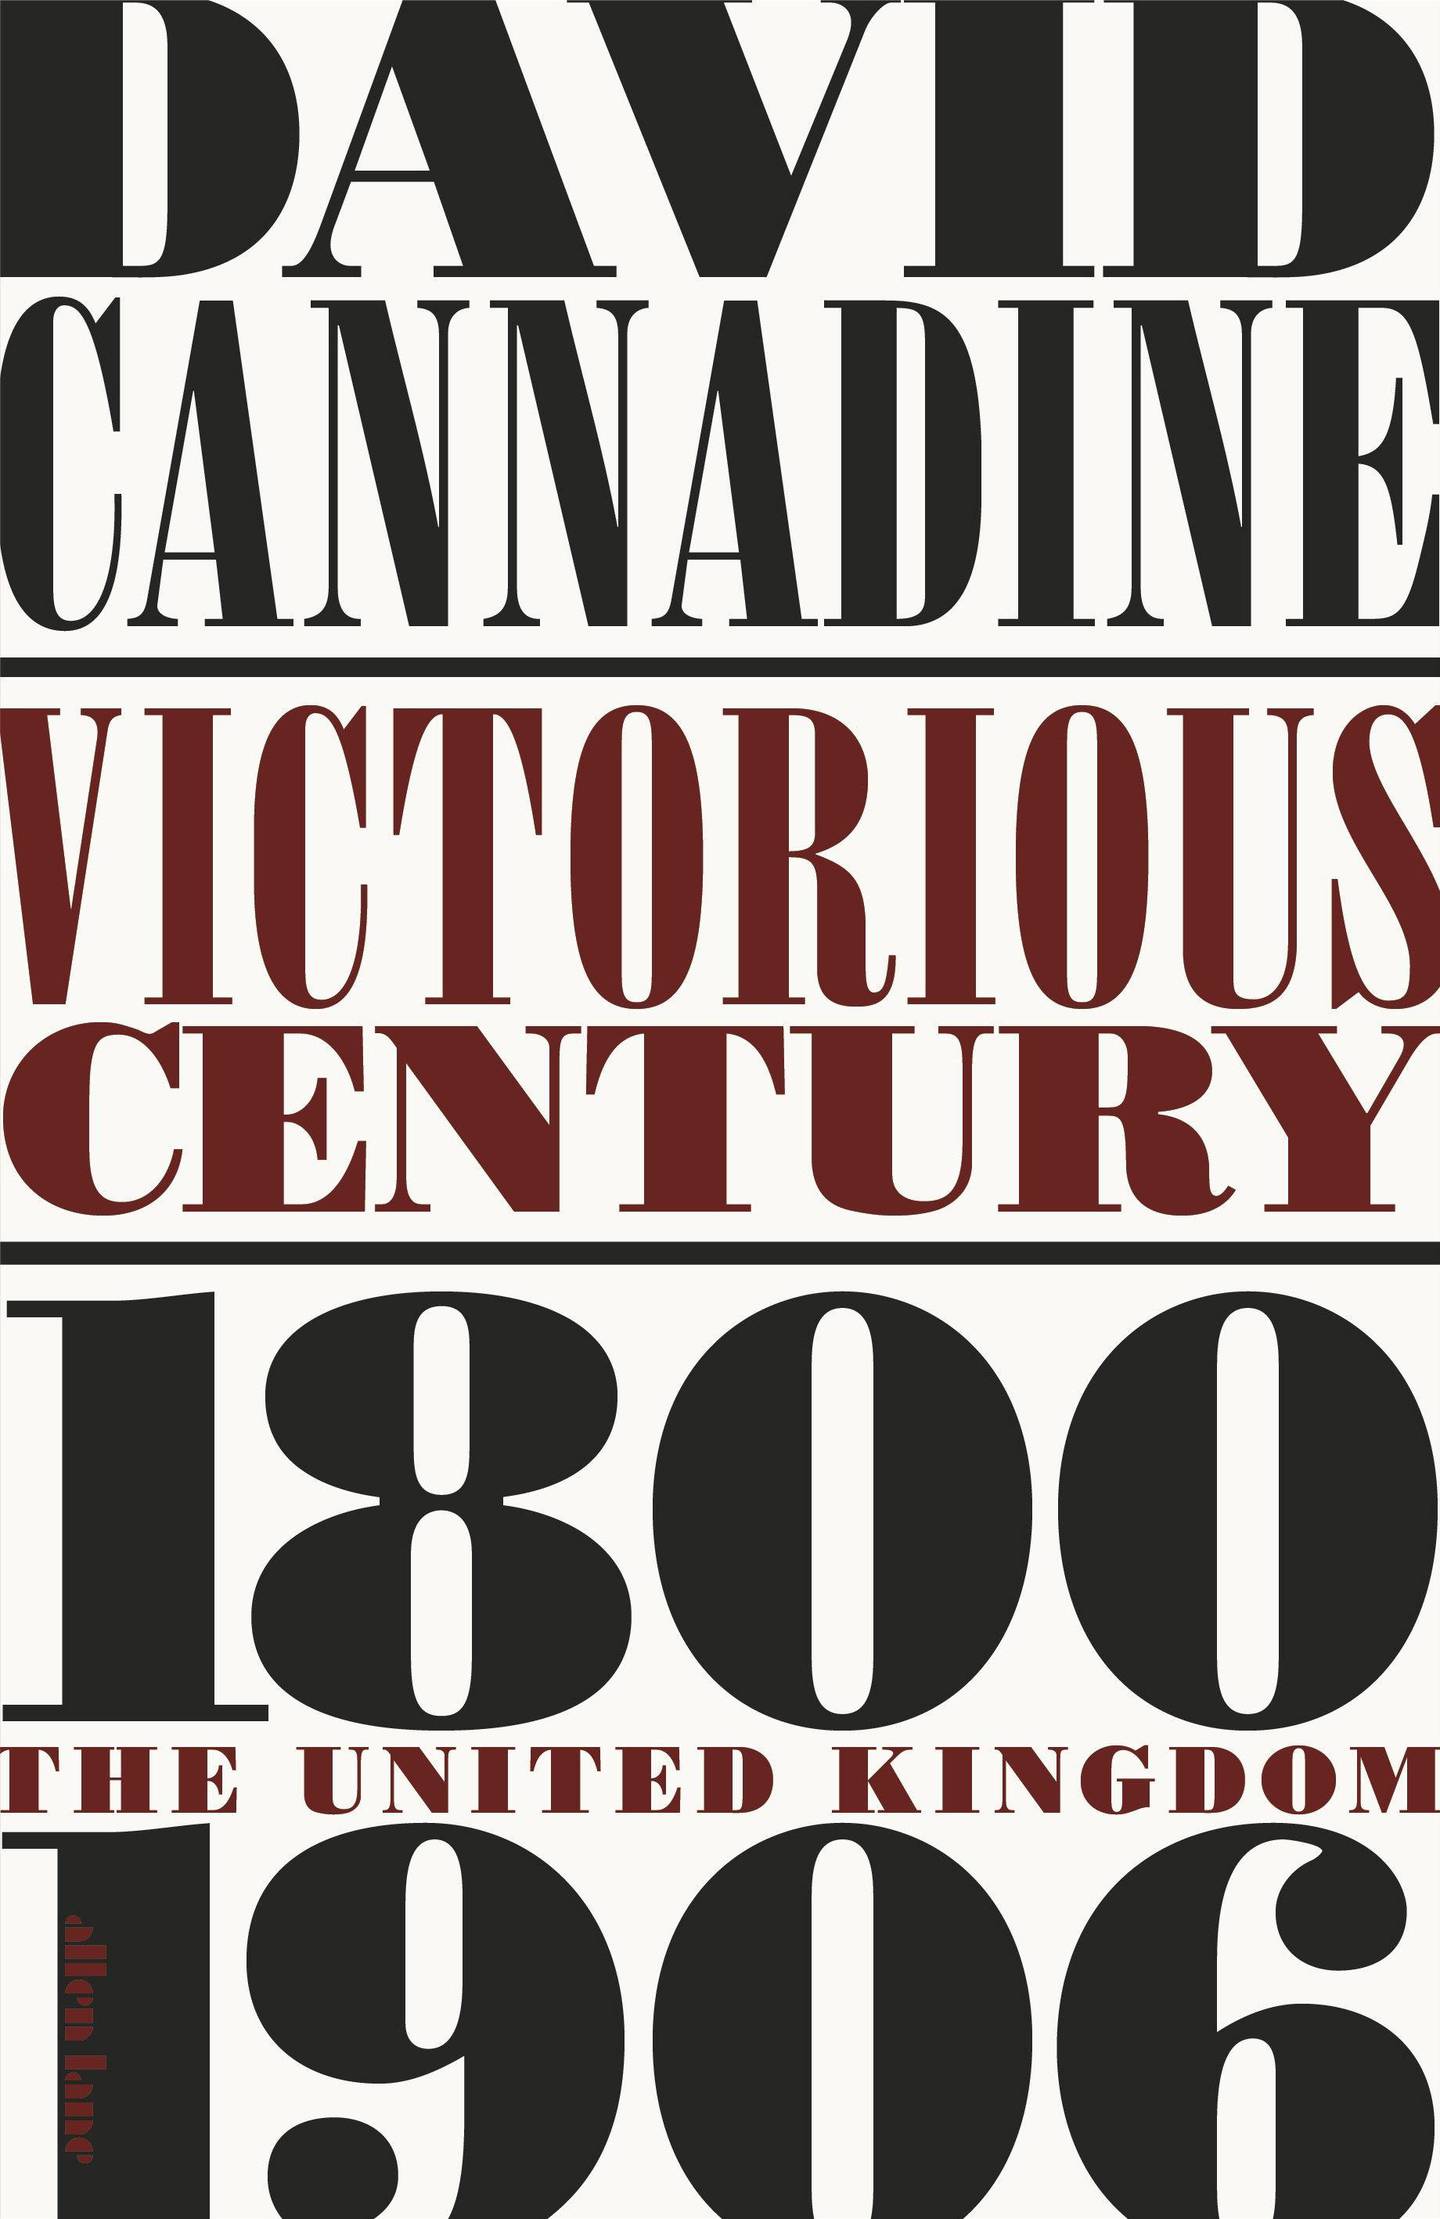 Victorious Century: The United Kingdom, 1800–1906 by David Cannadine published by Allen Lane. Courtesy Penguin UK